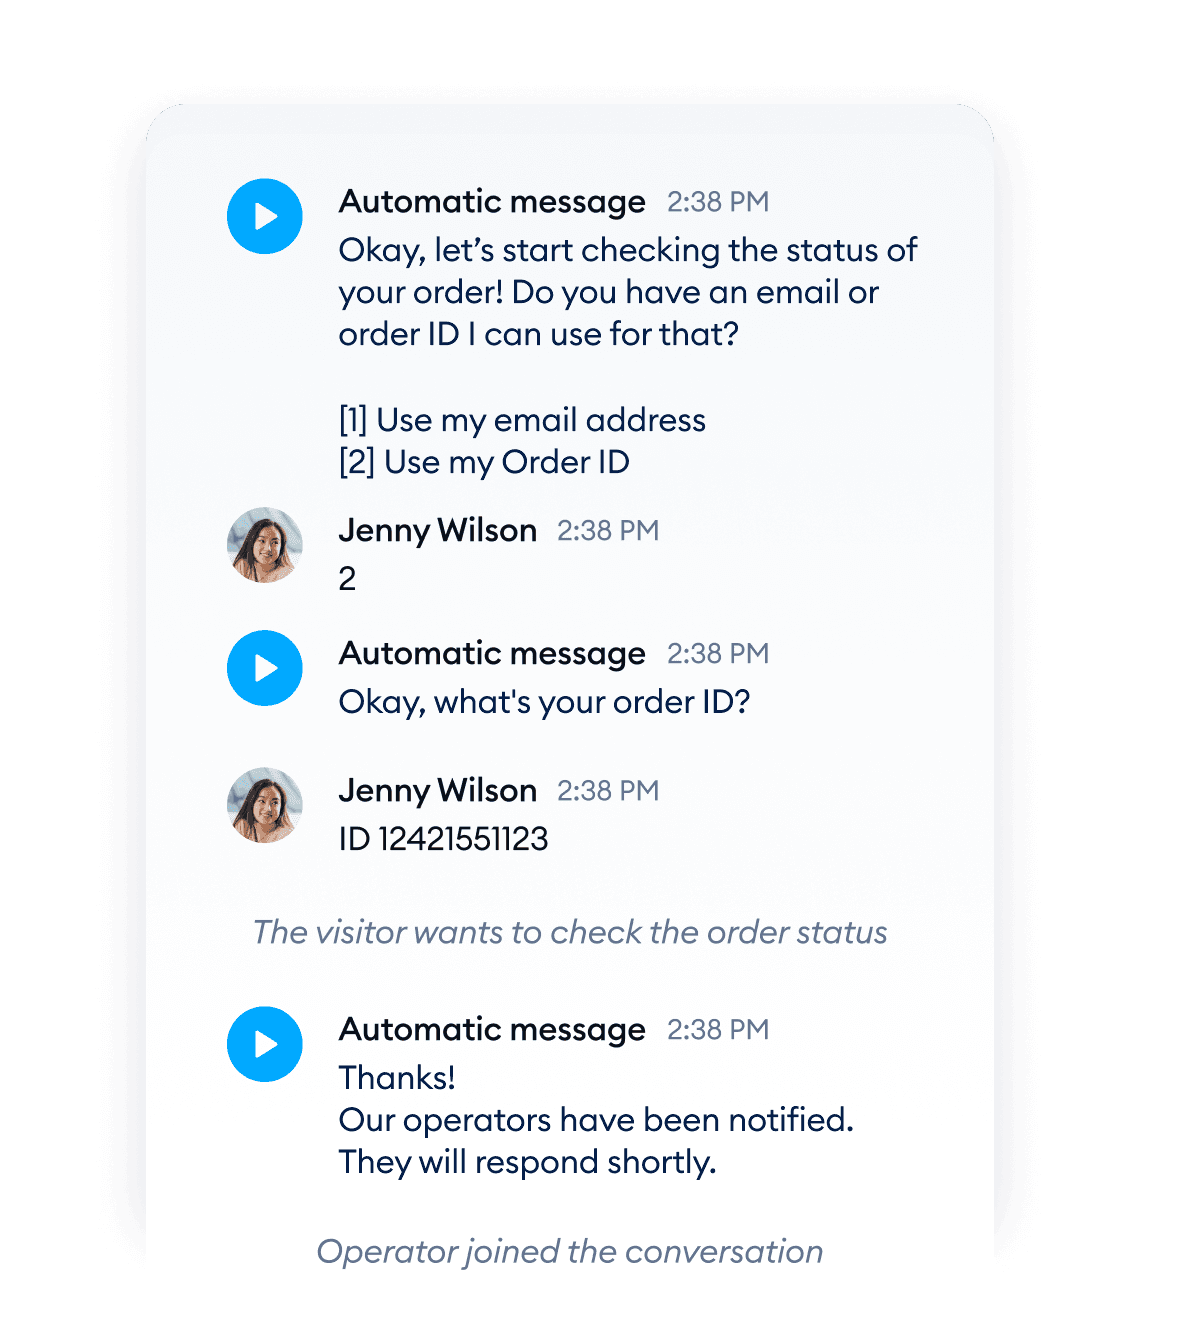 Automate your team’s work